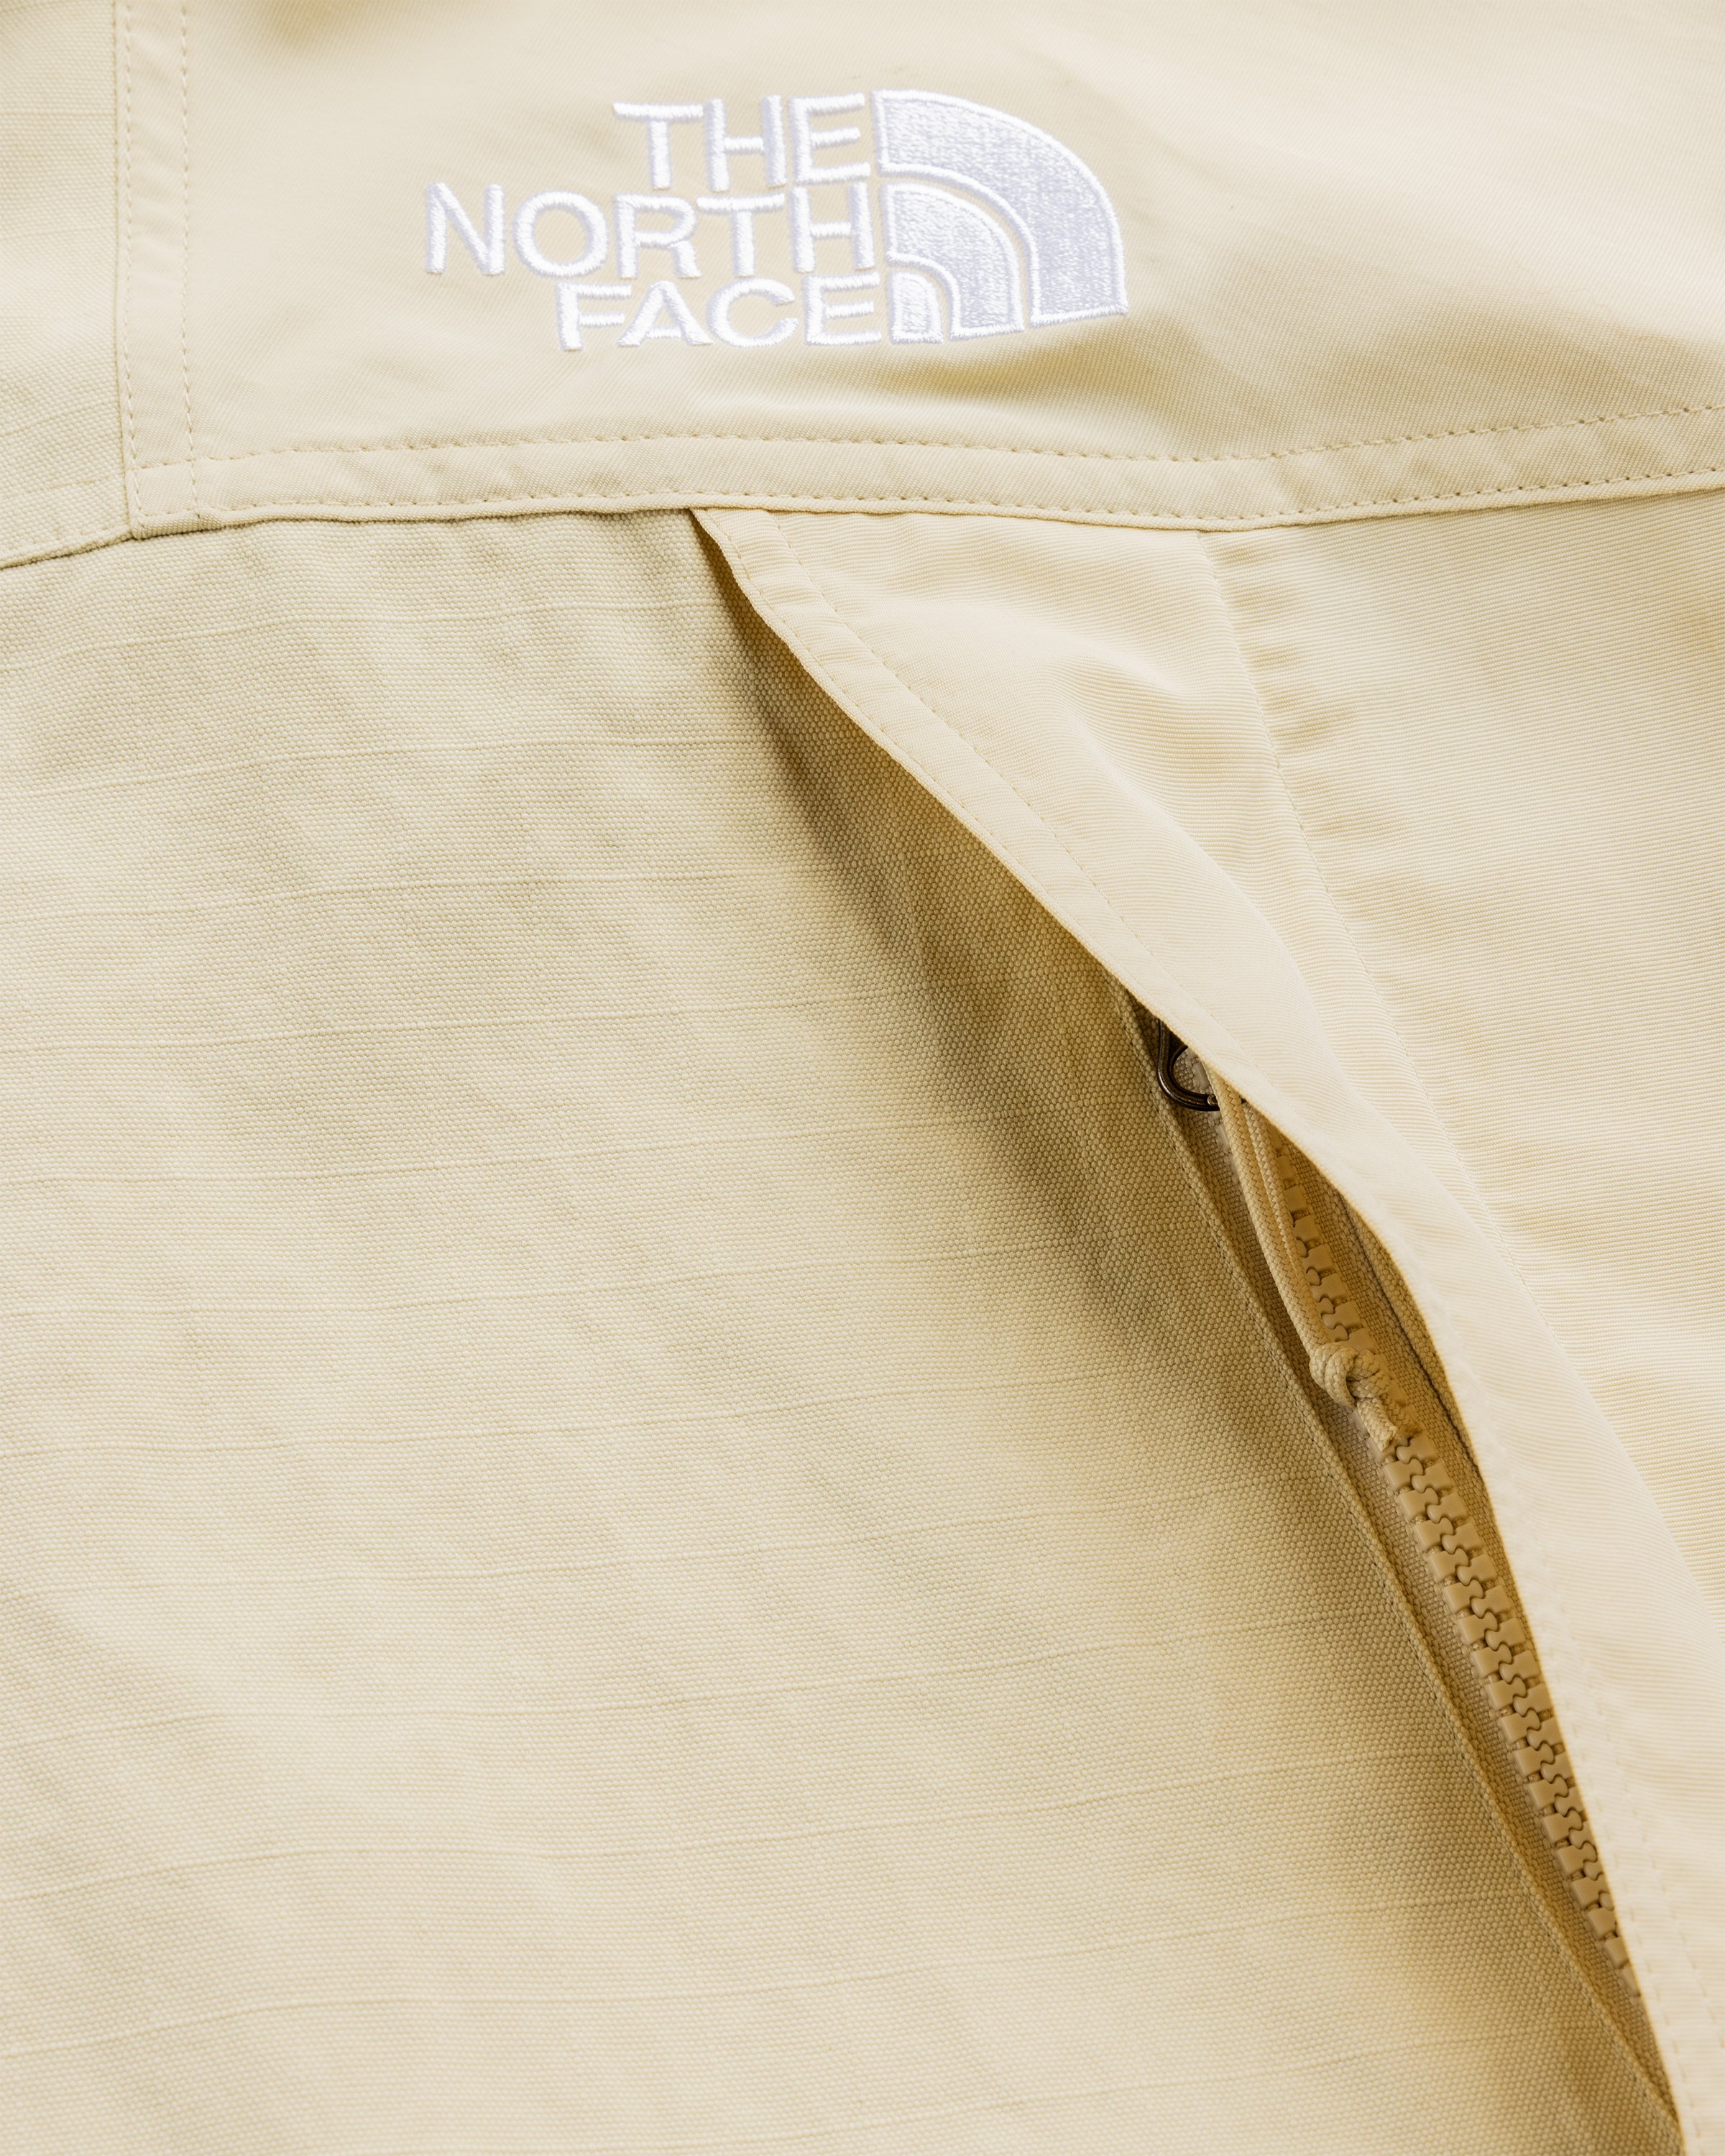 The North Face - M RIPSTOP MOUNTAIN CARGO JACKET GRAVEL - Clothing - Beige - Image 8